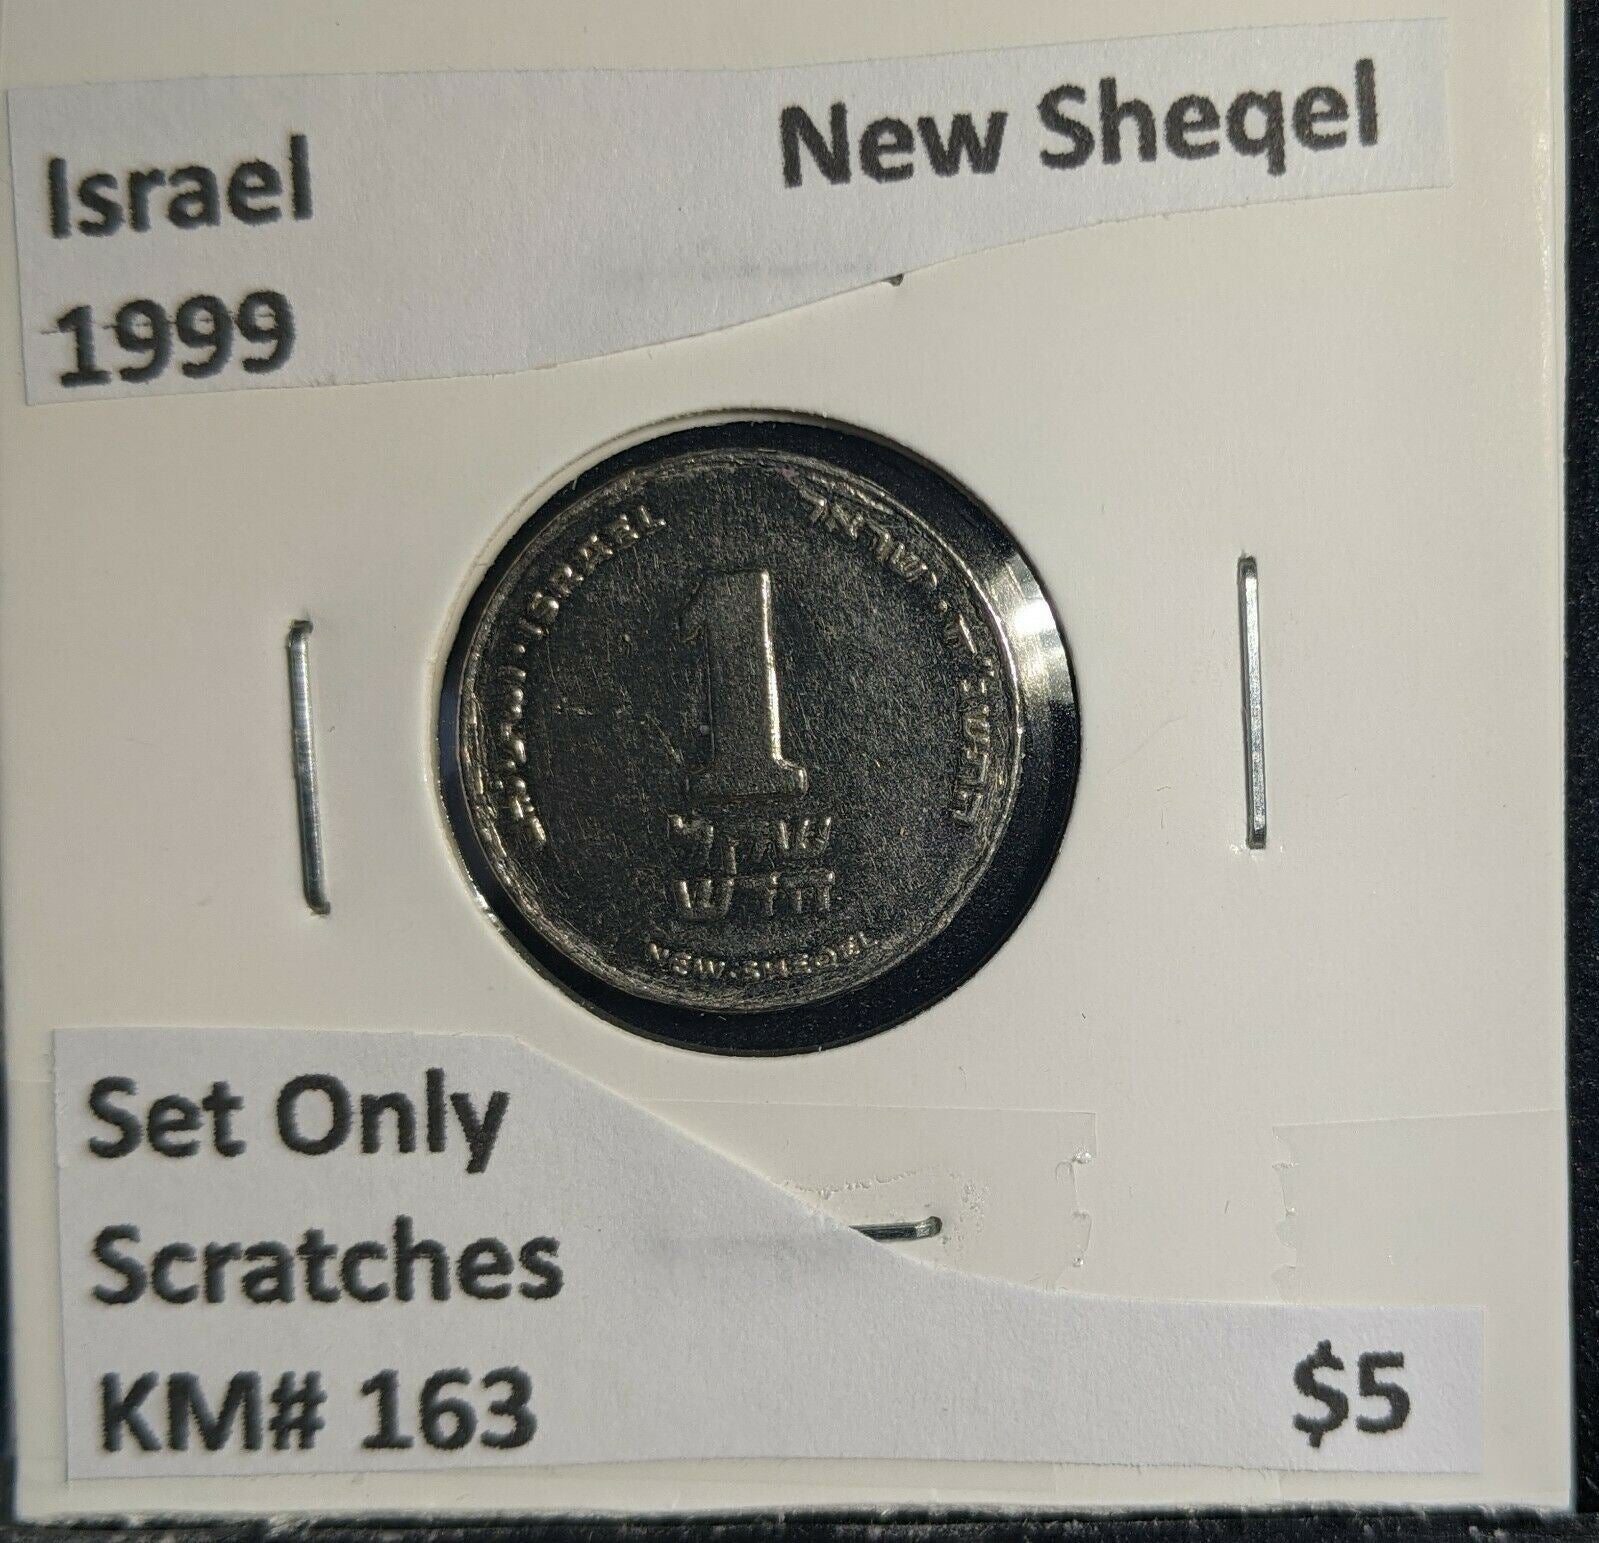 Israel New 1999 Sheqel KM# 163 Set Only Scratches #742 3B